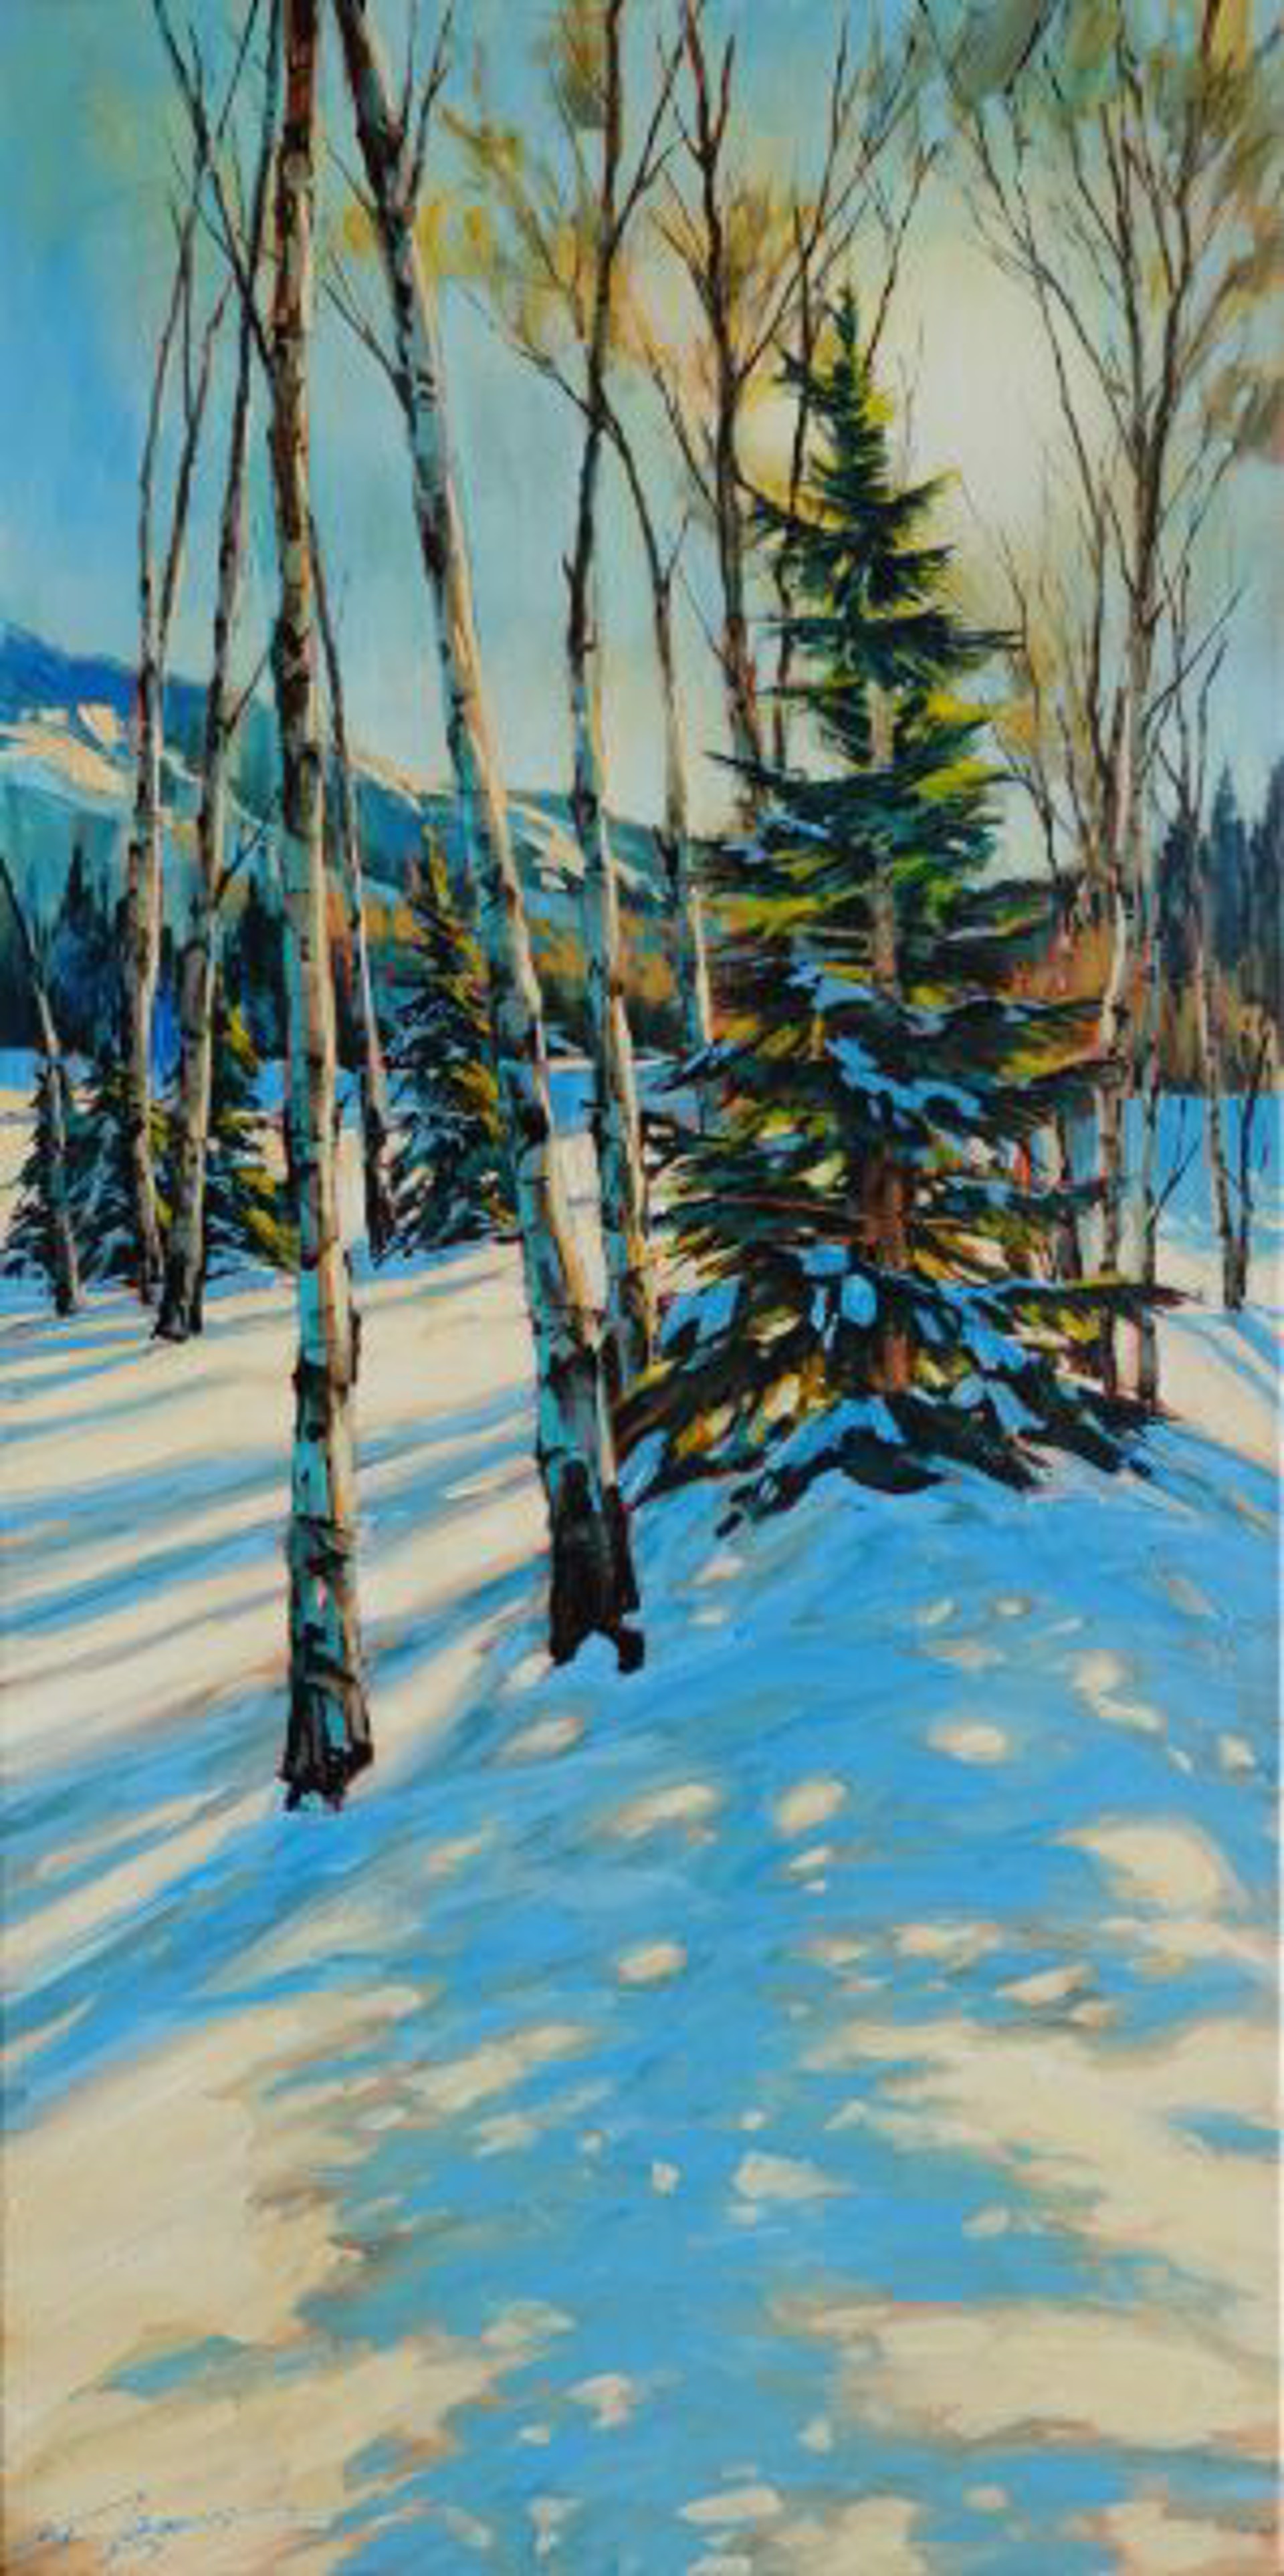 Snowshoes by DAVID LANGEVIN